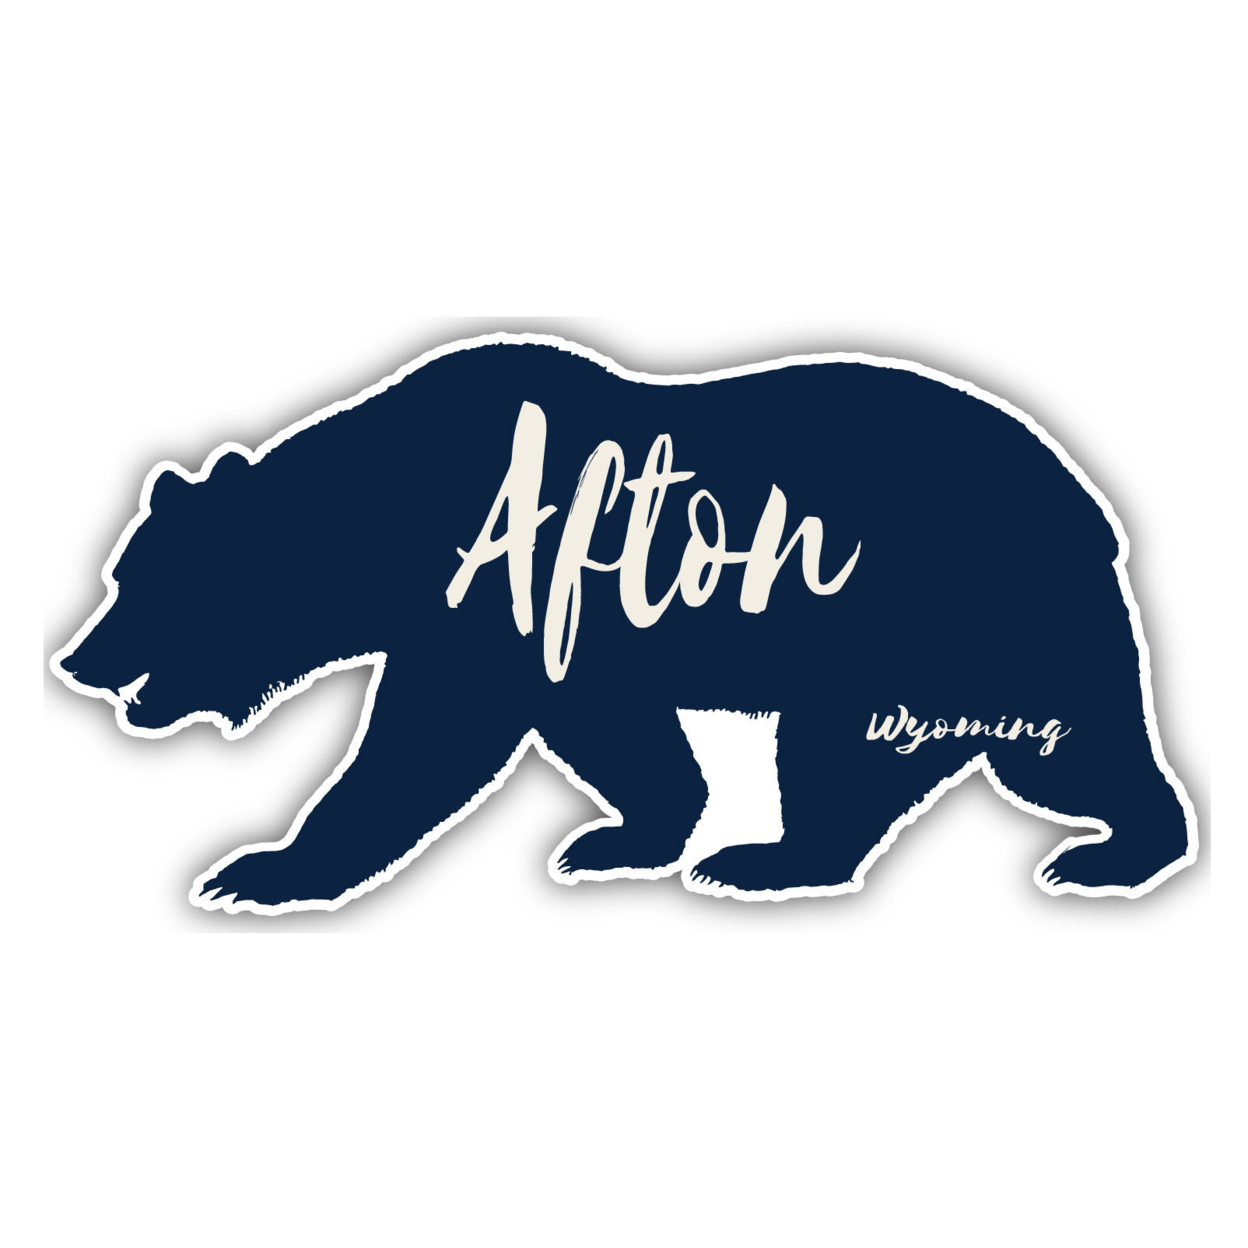 Afton Wyoming Souvenir Decorative Stickers (Choose Theme And Size) - 4-Pack, 10-Inch, Bear